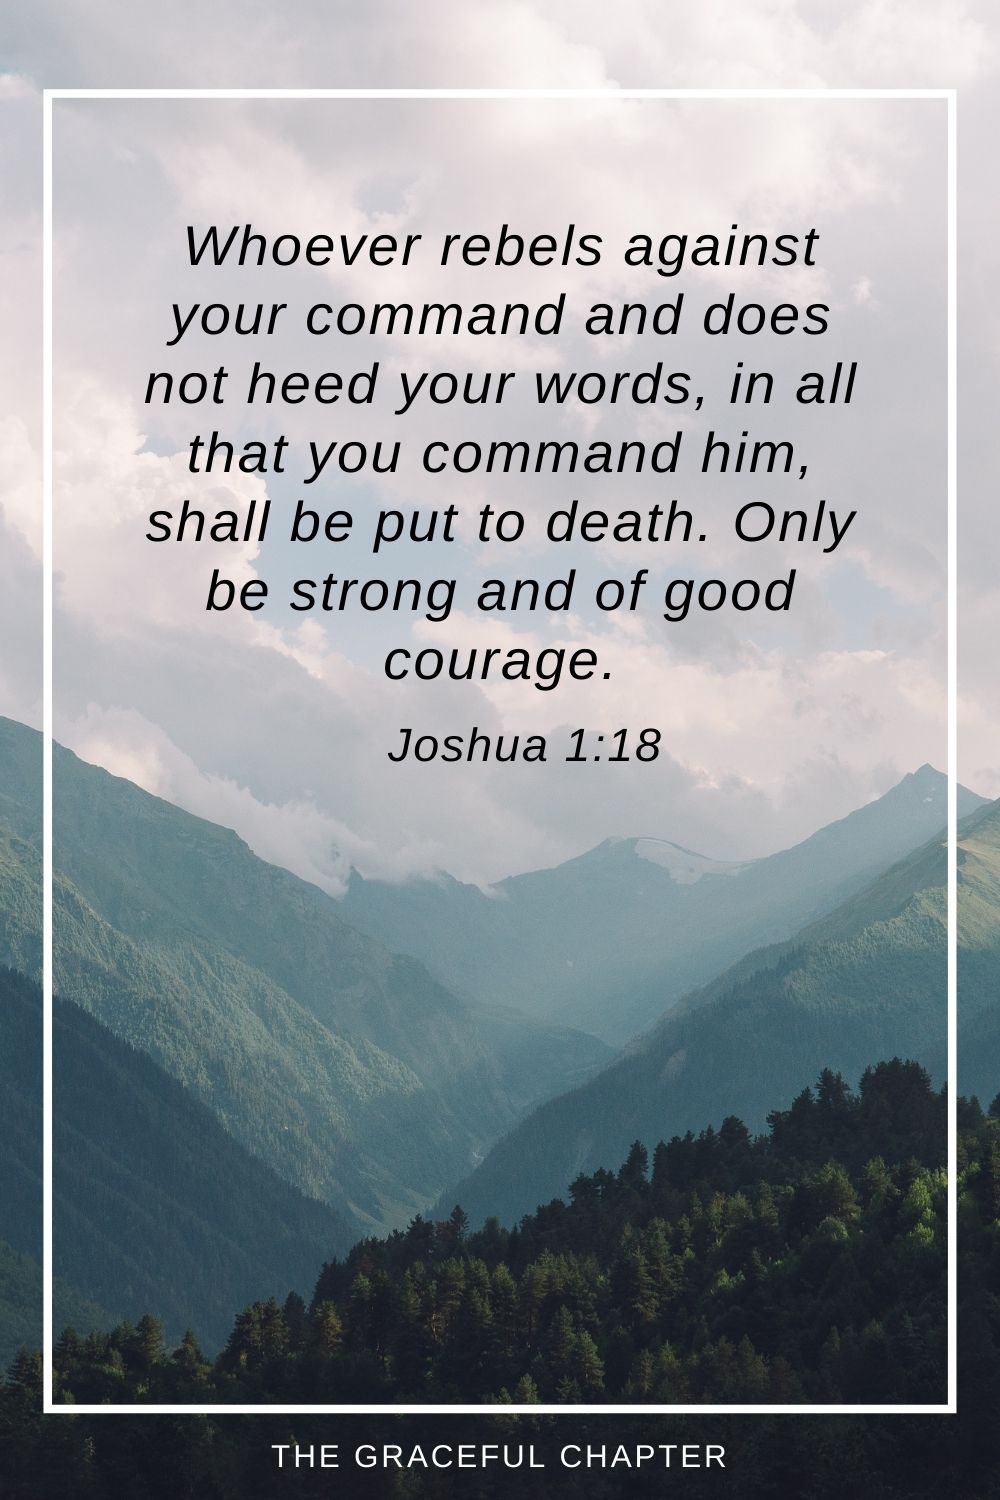 Whoever rebels against your command and does not heed your words, in all that you command him, shall be put to death. Only be strong and of good courage.” Joshua 1:18